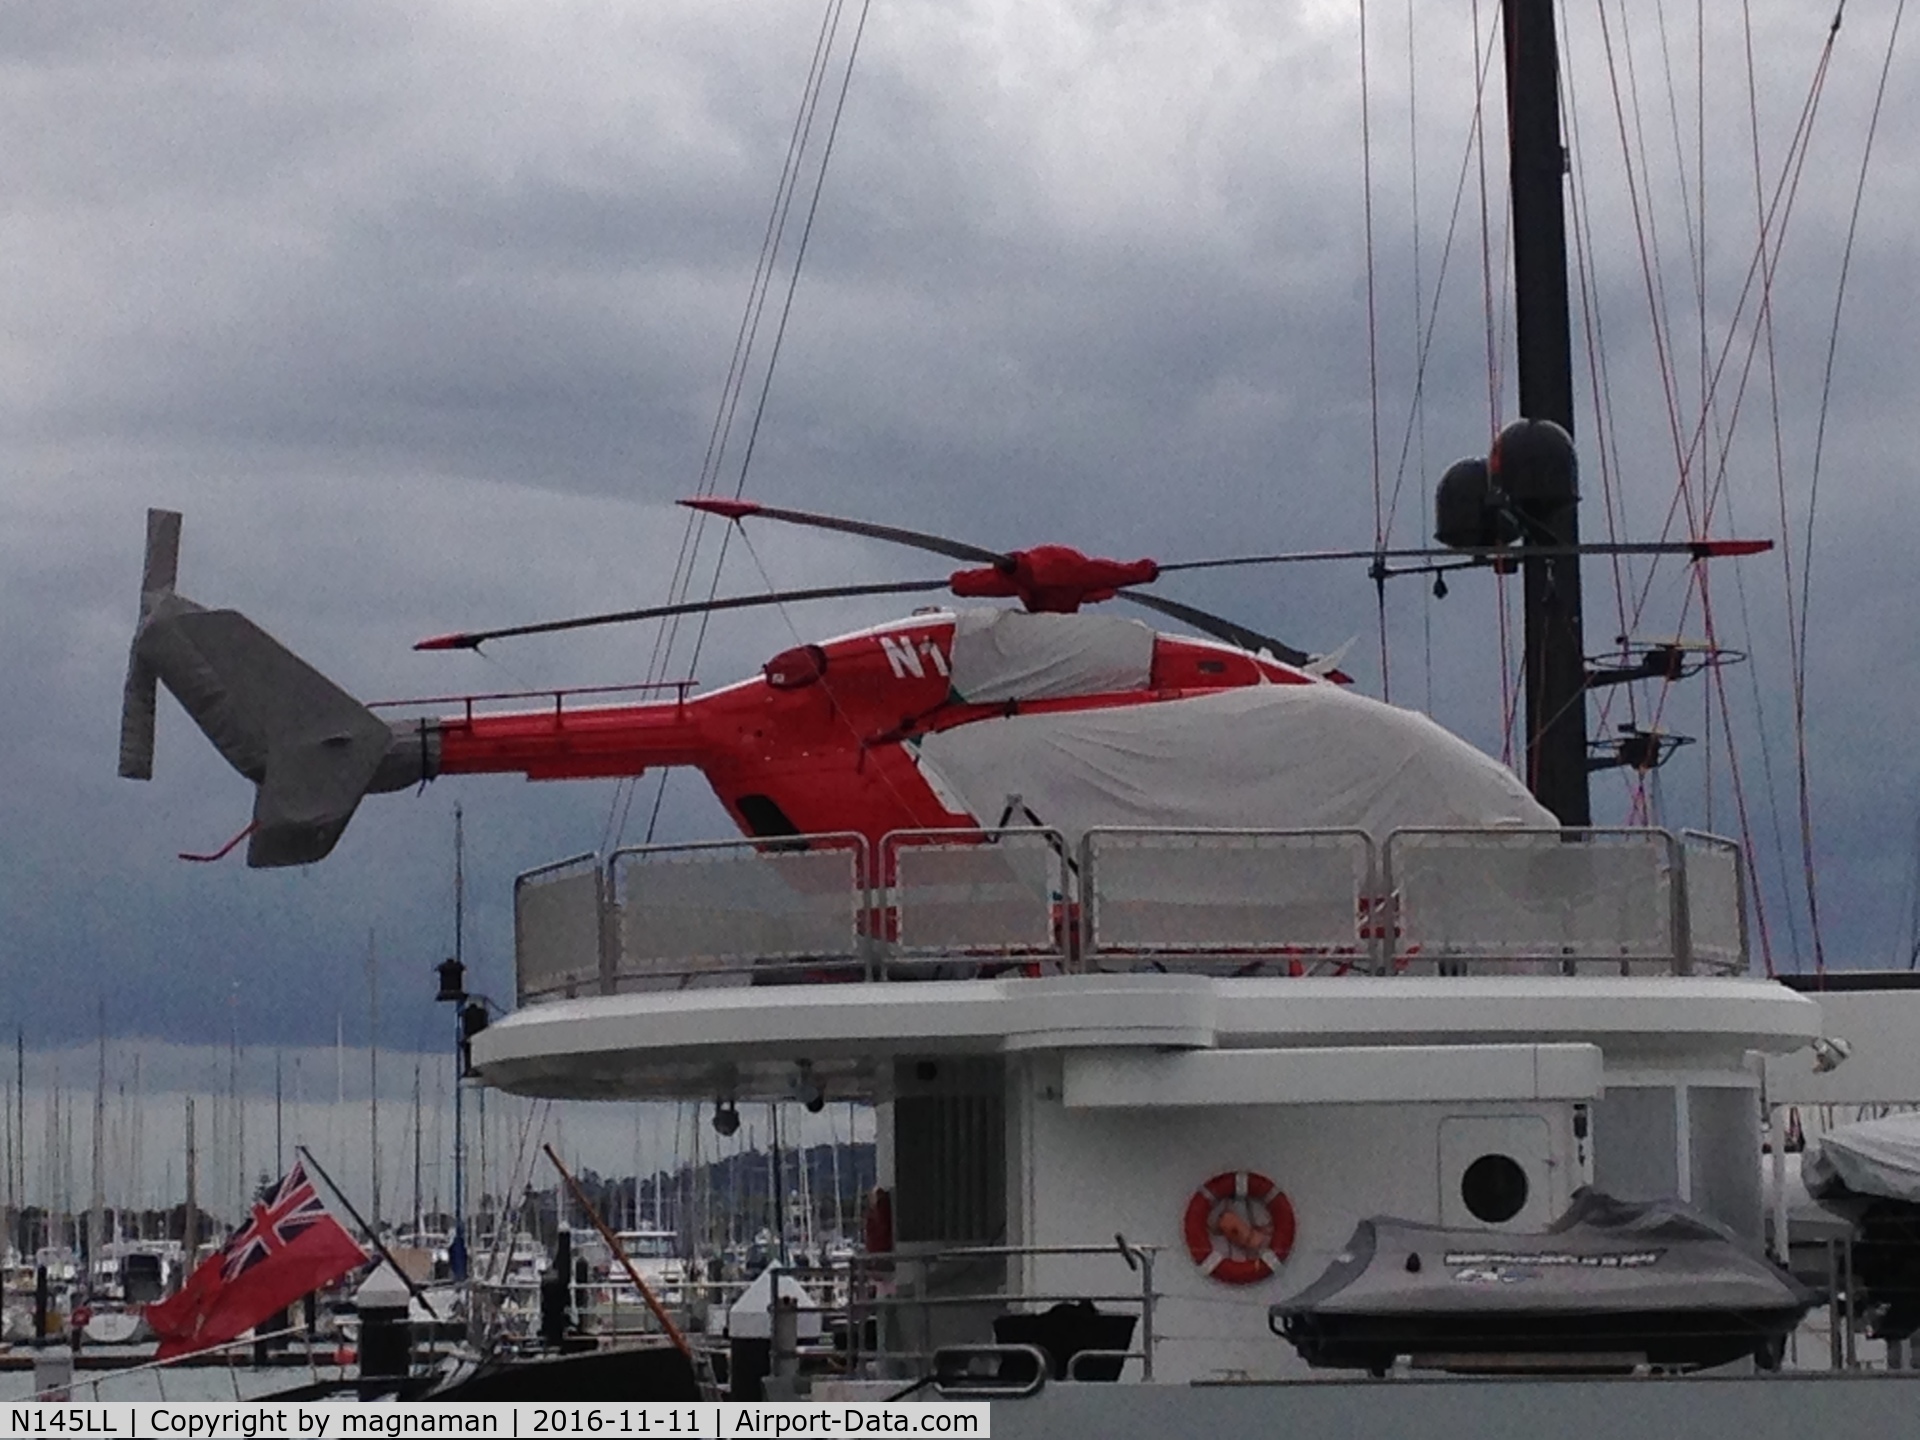 N145LL, Eurocopter-Kawasaki EC-145 (BK-117C-2) C/N 9574, part covered on super yacht - Auckland harbour